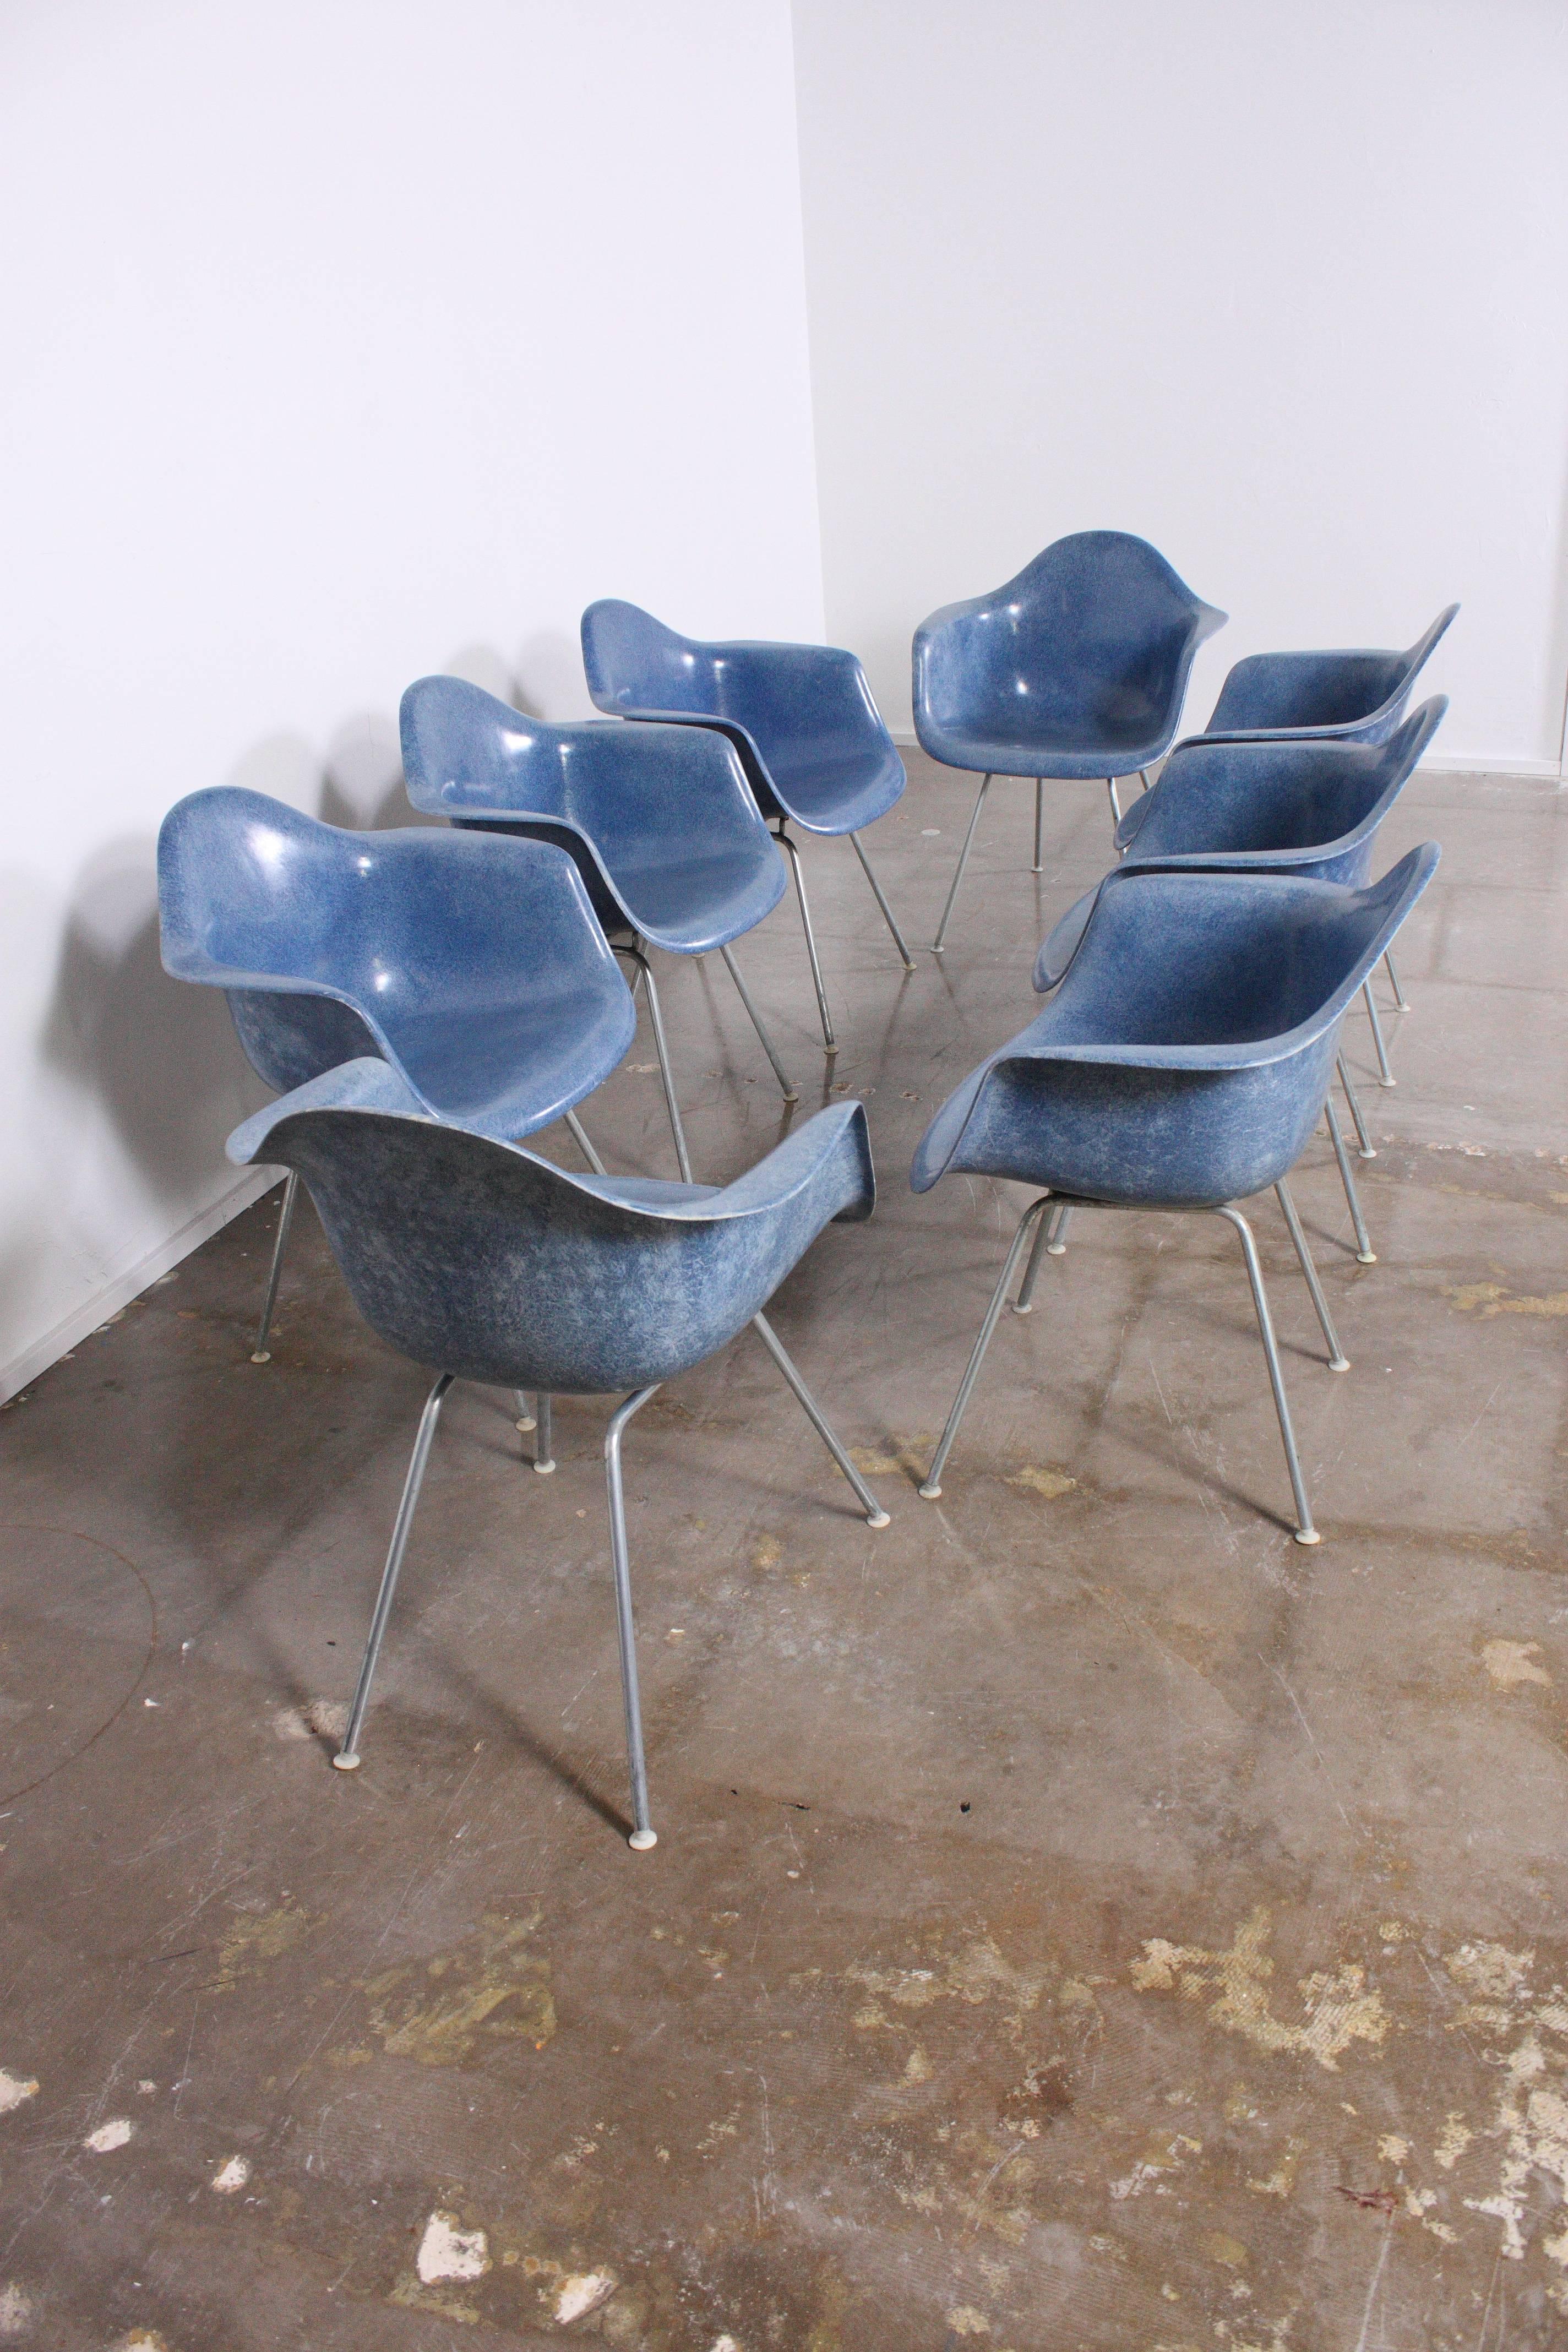 Late 20th Century Rare Blue Fiberglass Shell Chairs by Charles Eames for Herman Miller